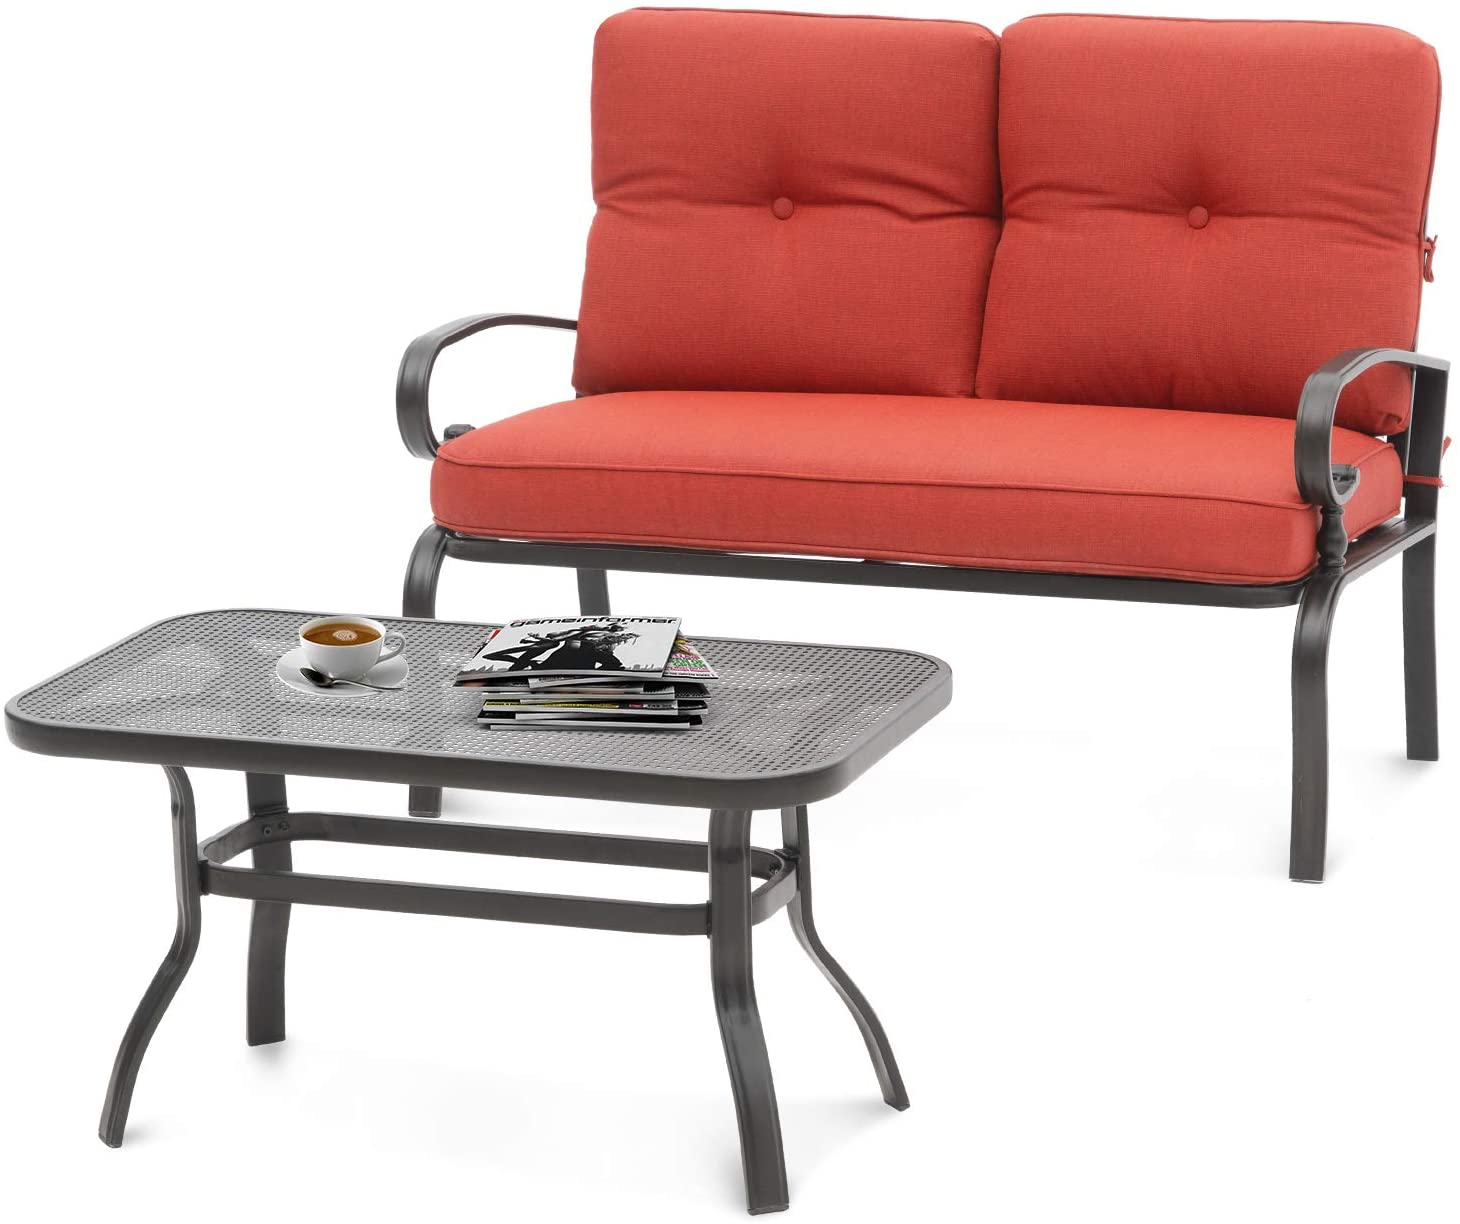 SUNCROWN 2-Piece Patio Furniture Outdoor Loveseat Set Wrought Iron Frame Bench Sofa with Coffee Table, Red - image 5 of 6